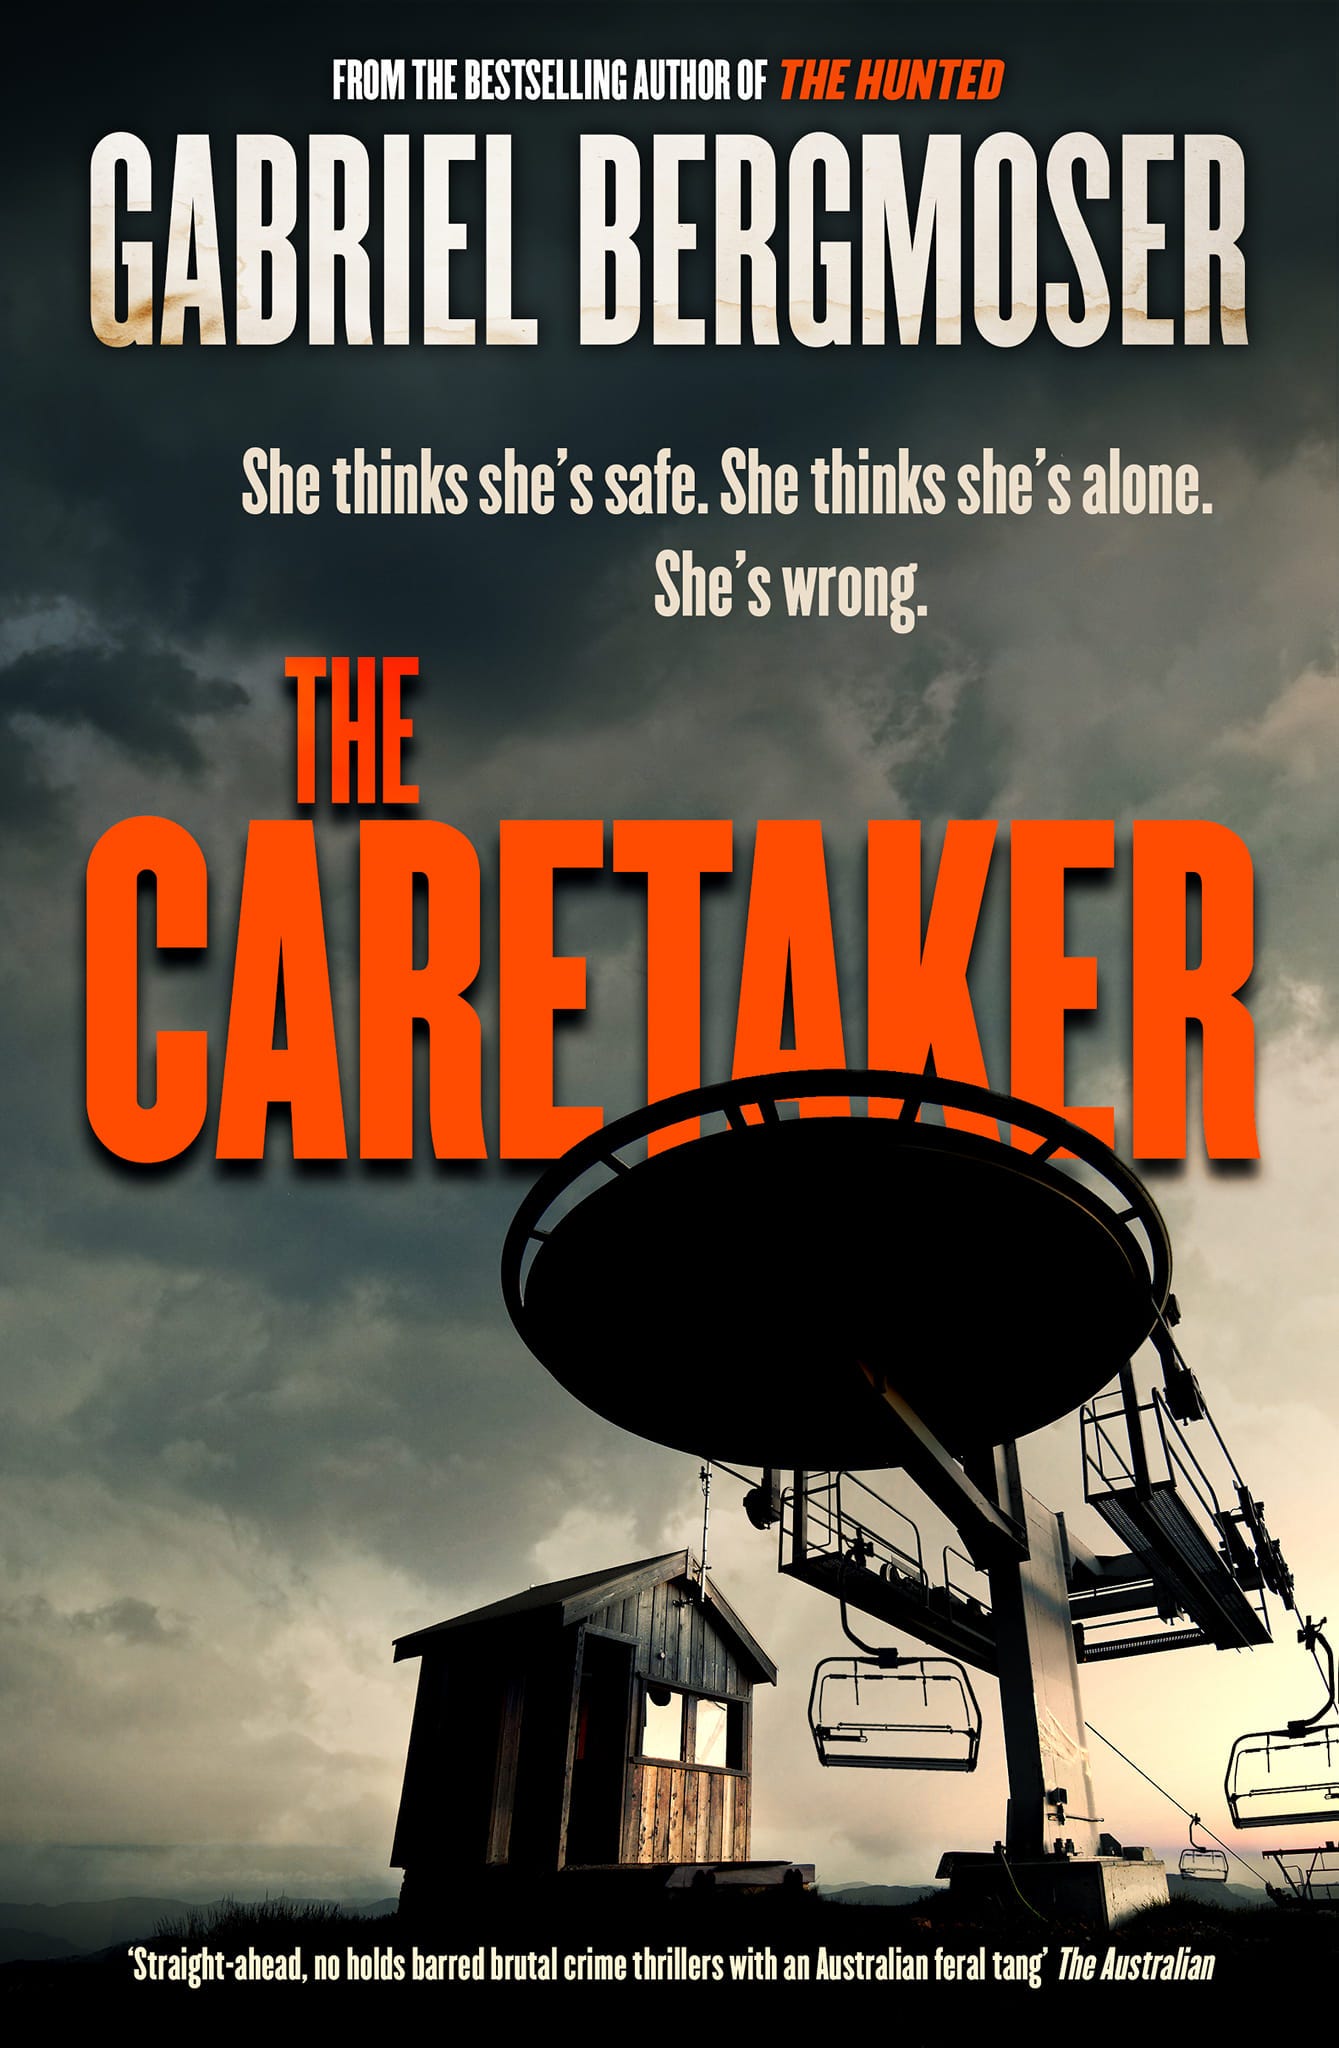 May be an image of text that says "FROM THE BESTSELLING OF THE HUNTED GABRIEL BERGMOSER She thinks she' S safe. She thinks she s alone. She' wrong. THE CARETAKER holds barred brutal crime thrillers with Australian feral"